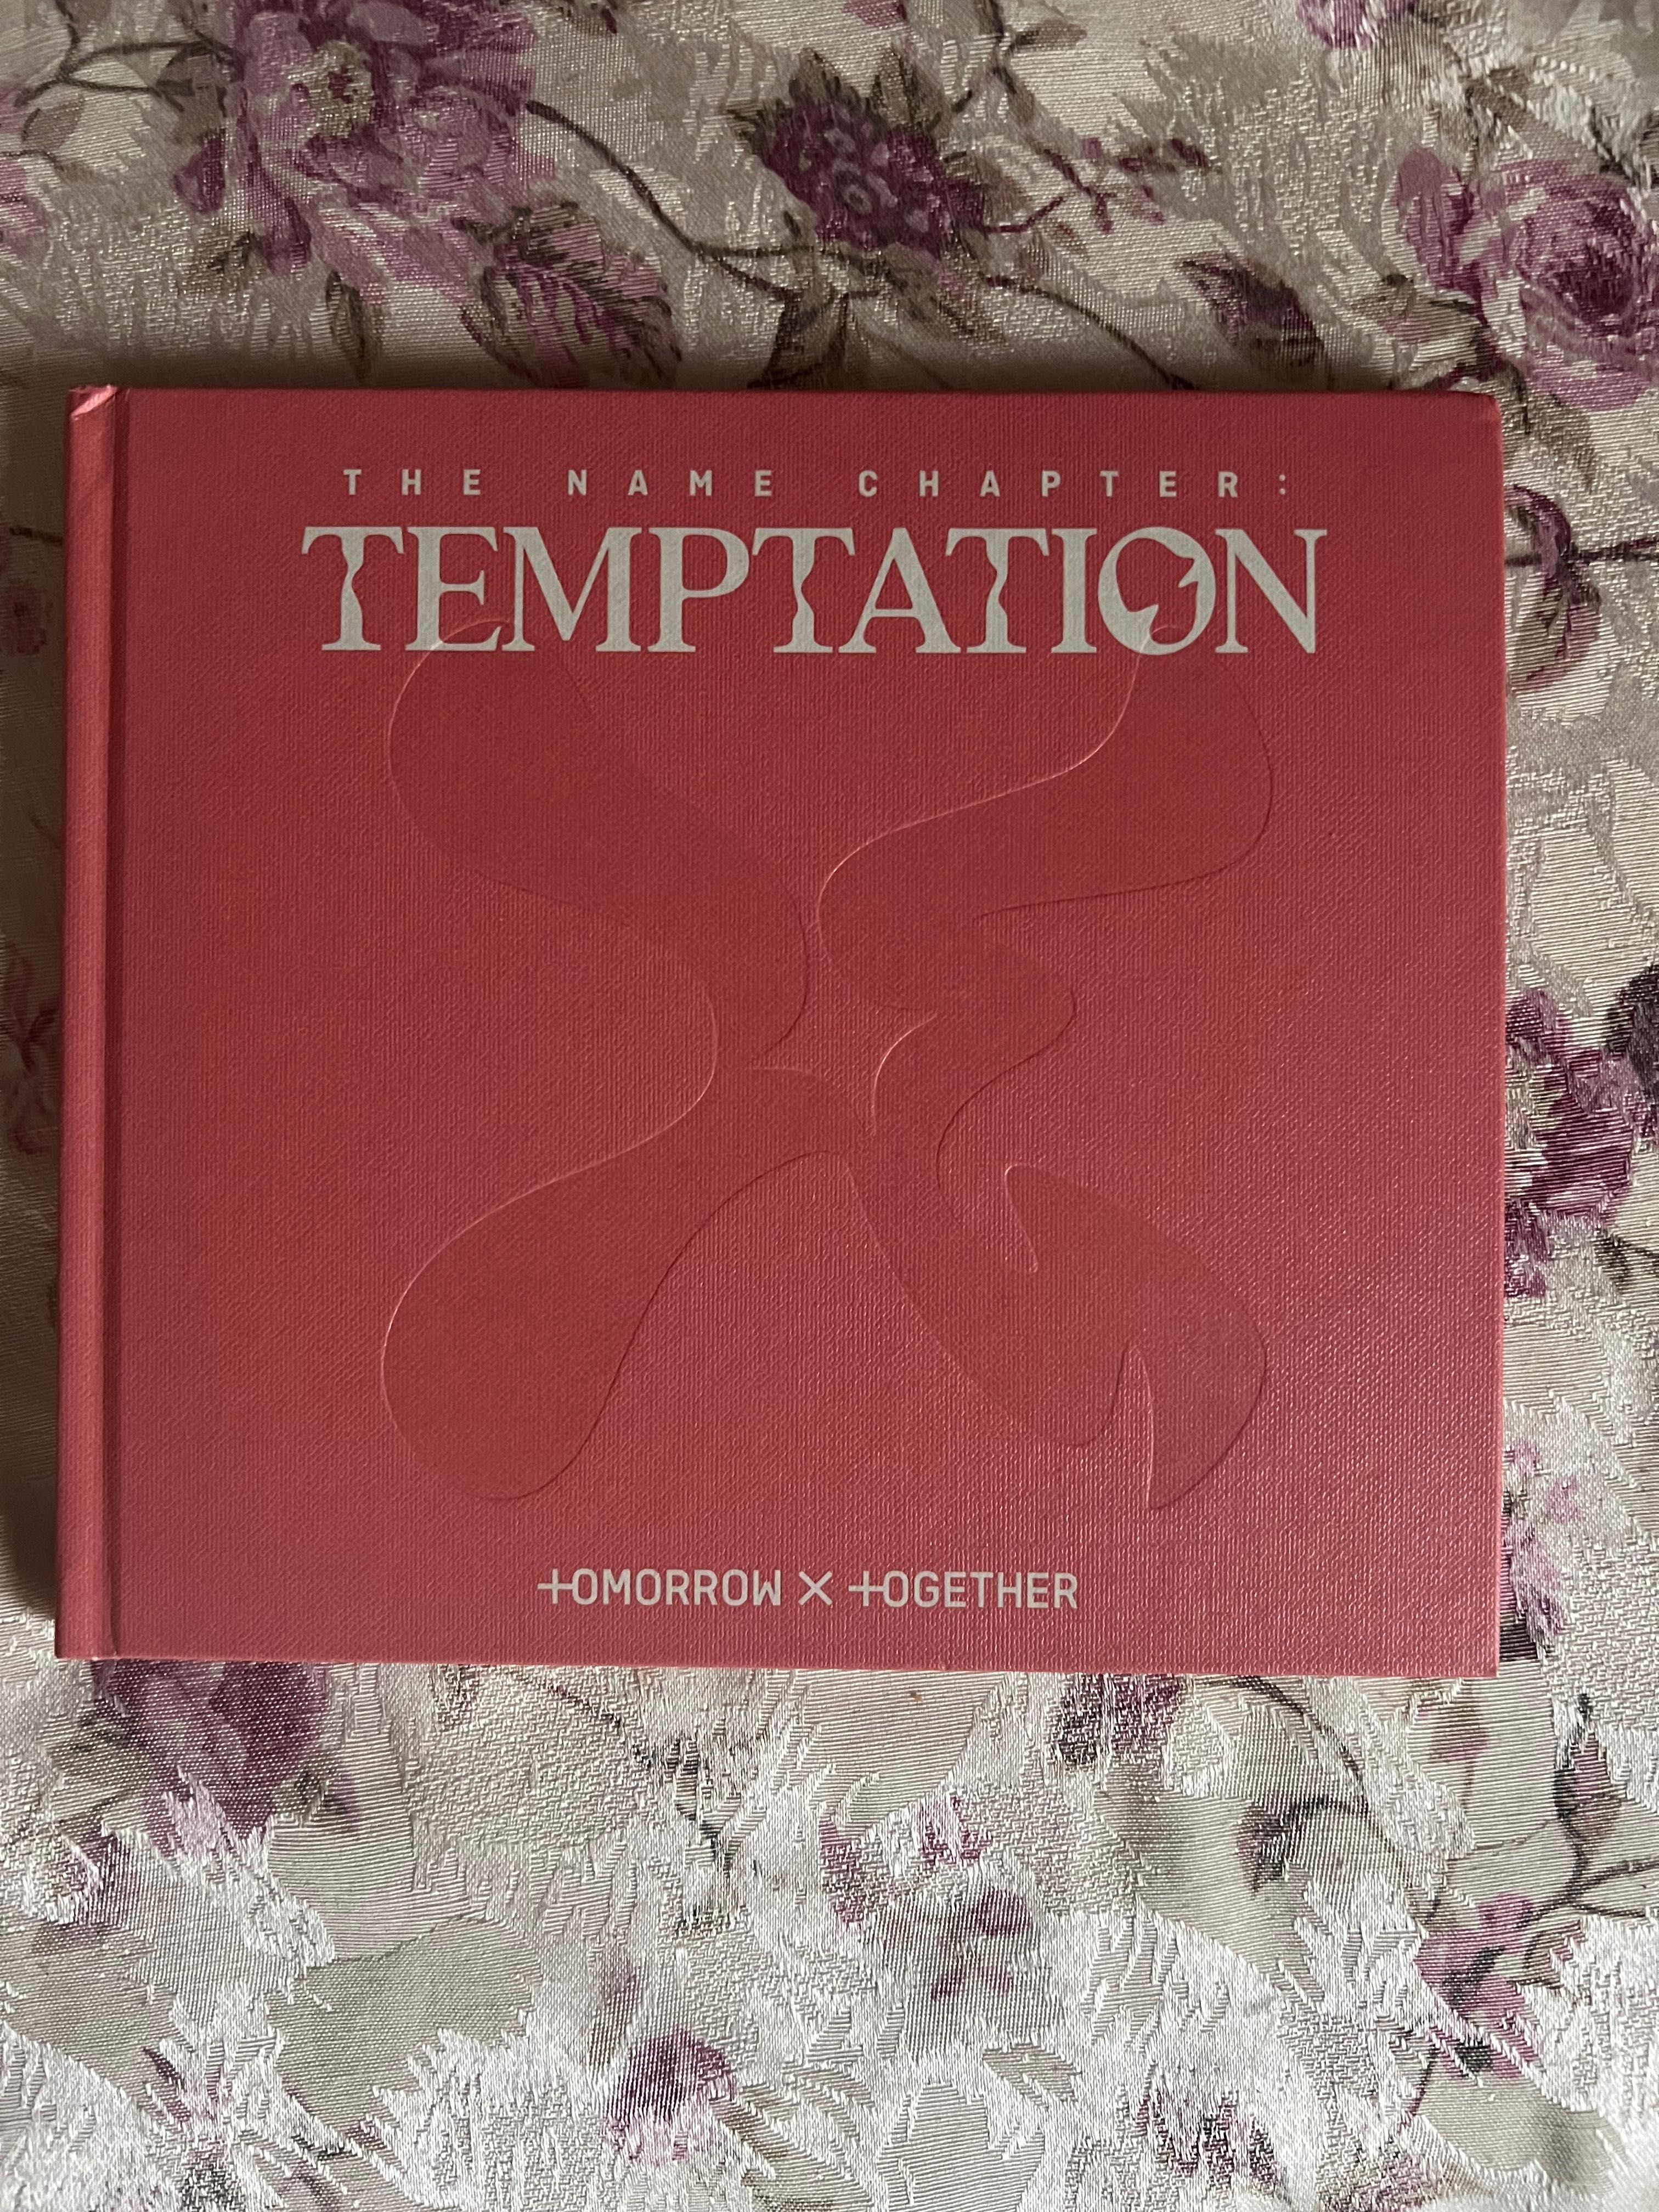 TXT албум The name chapter temptation